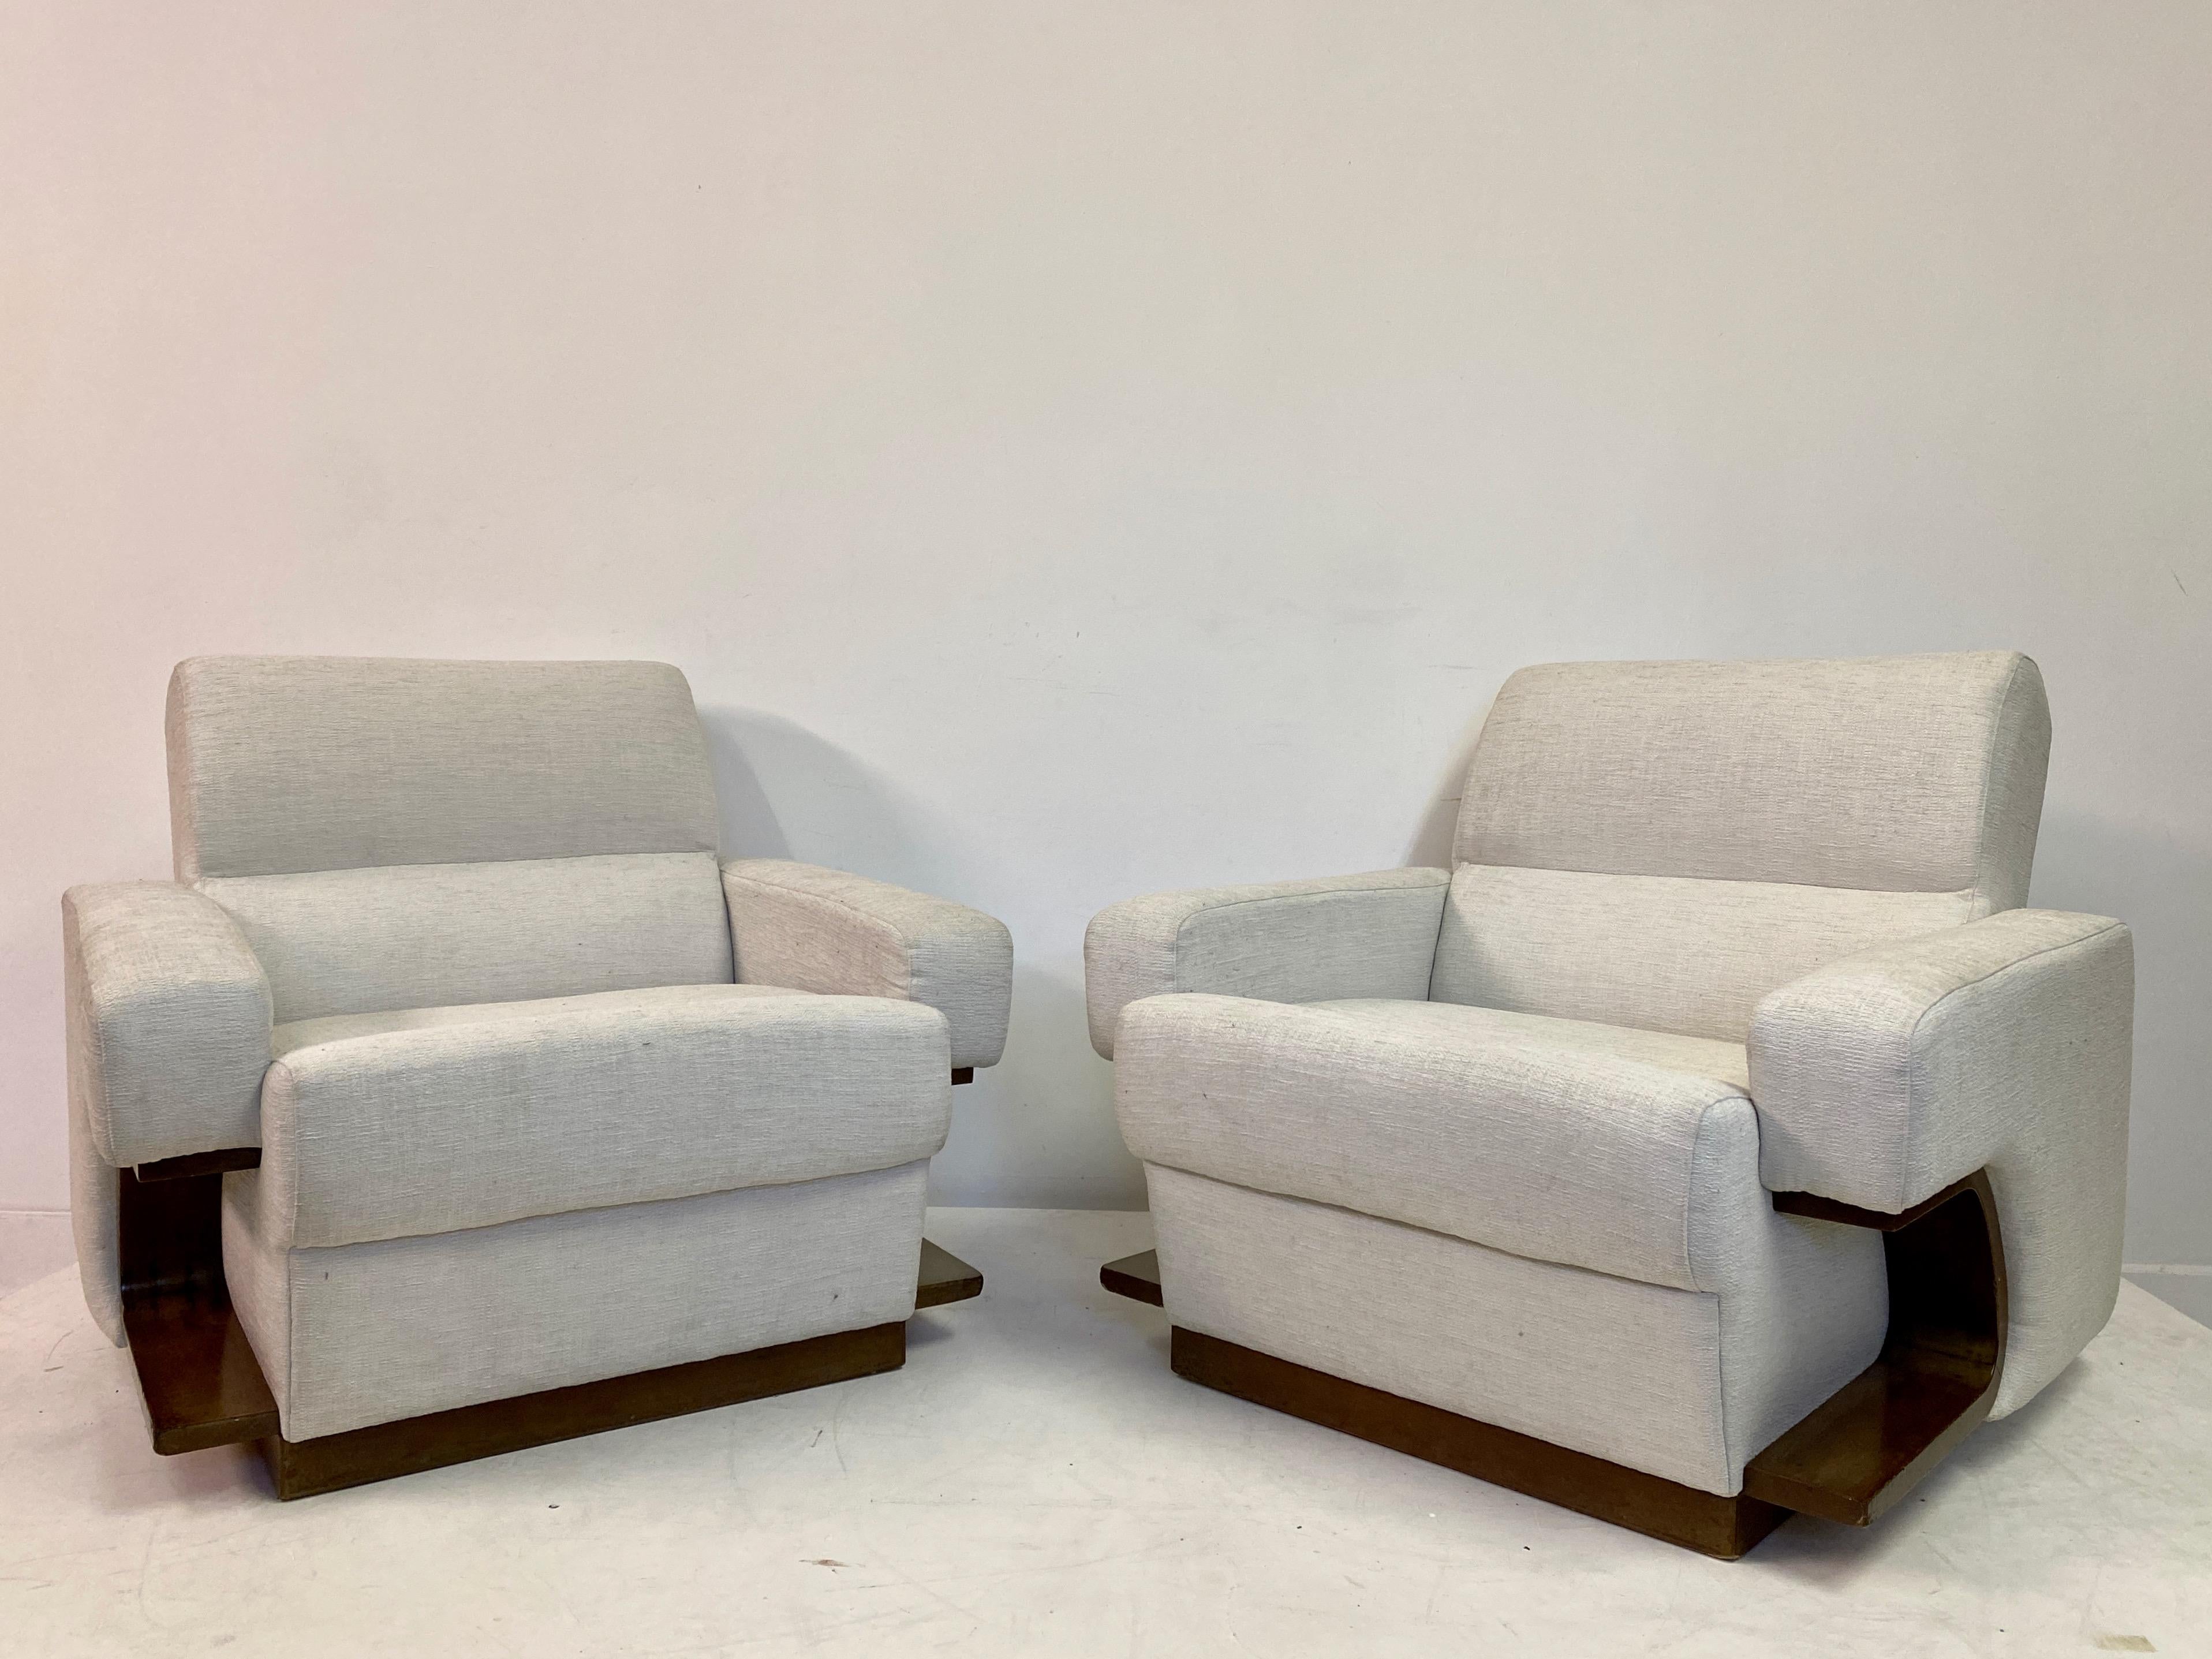 Pair of 1970s Italian Lounge Chairs In Good Condition For Sale In London, London